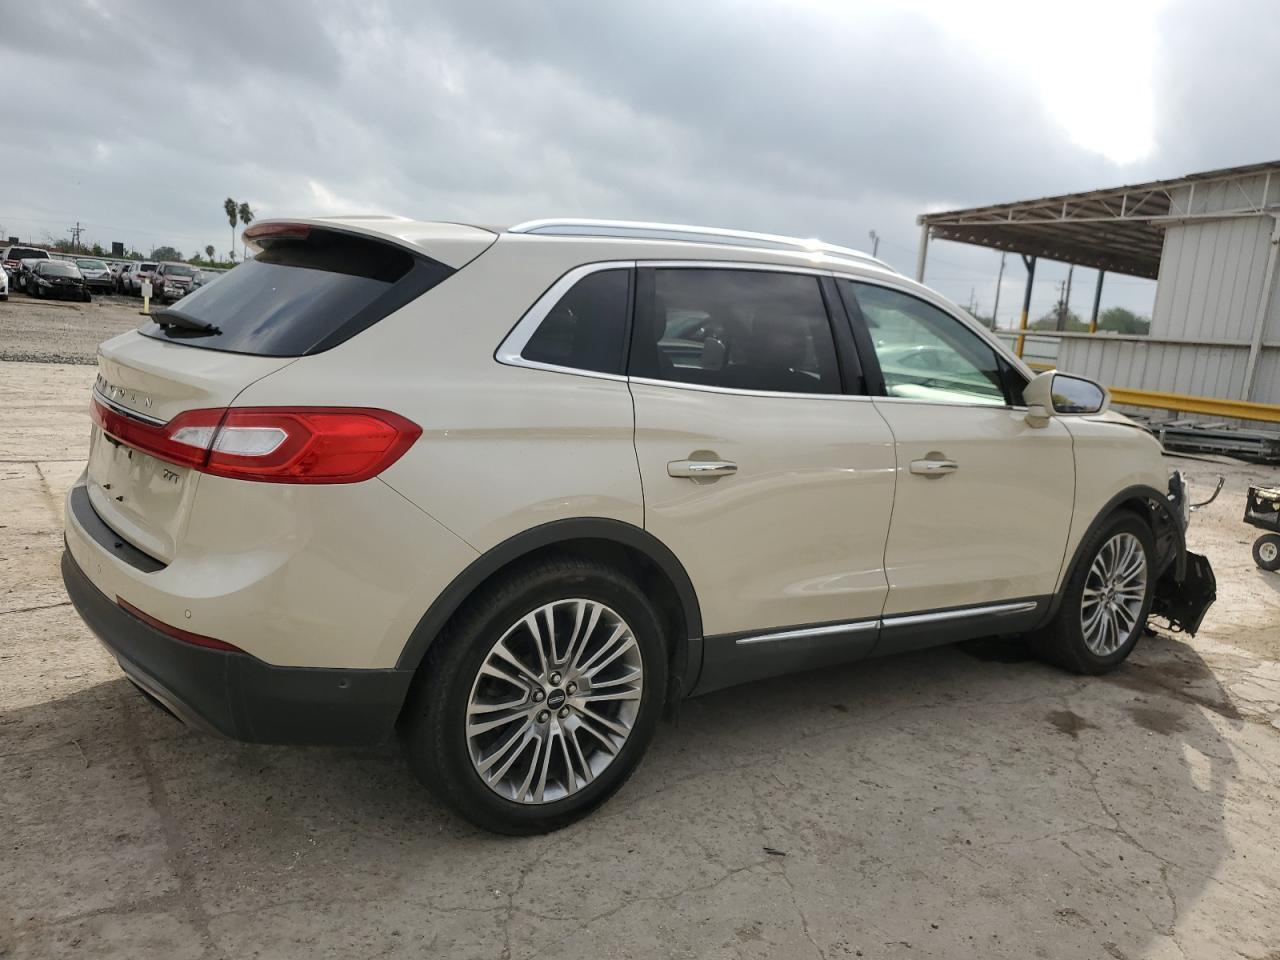 2018 LINCOLN MKX for Sale